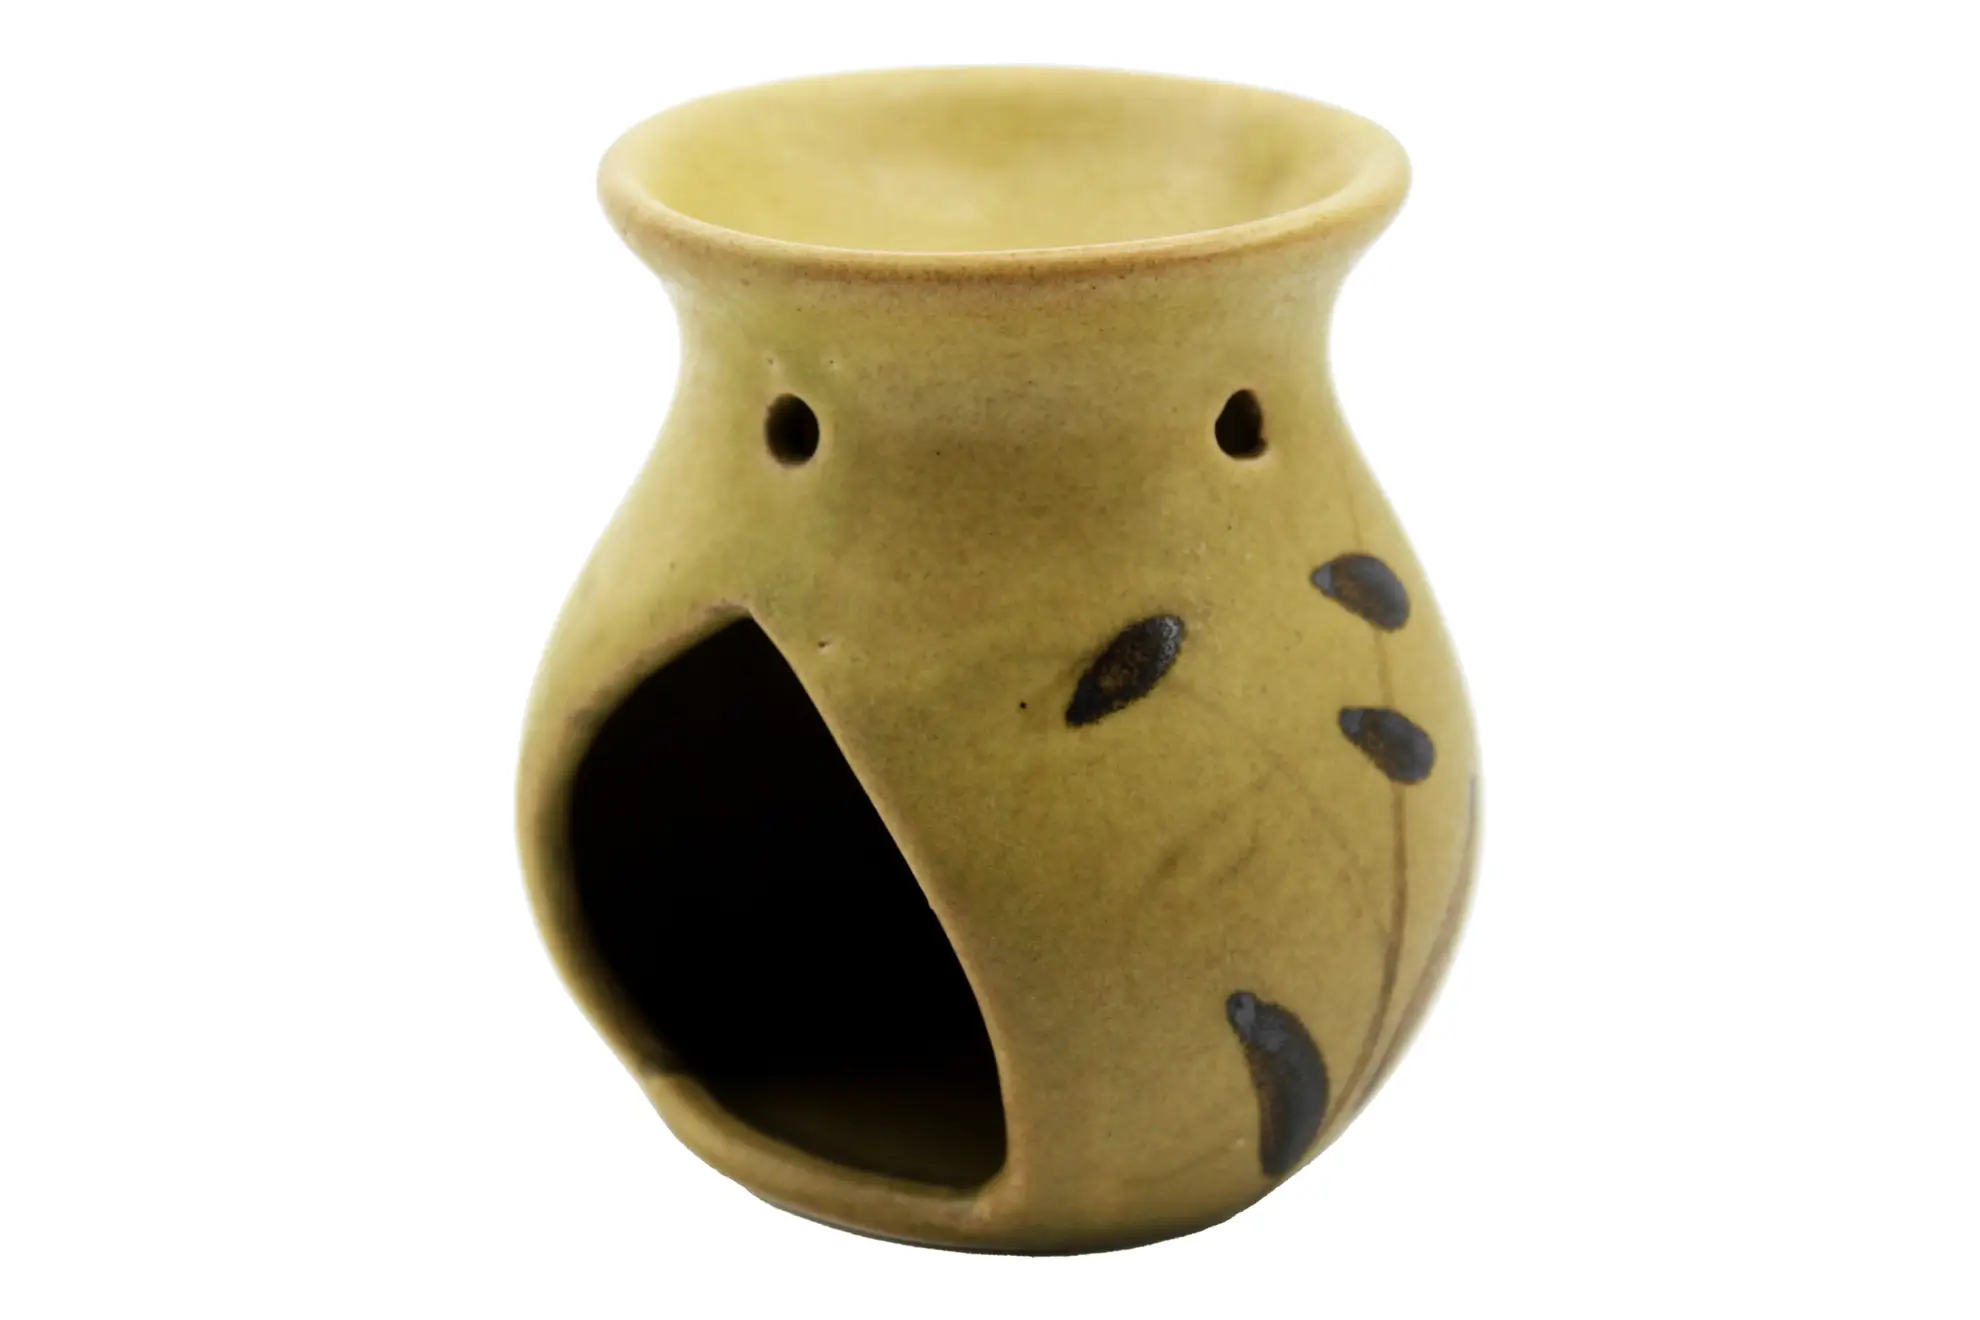 Bamboo Hand Painted Ceramic Oil Diffuser